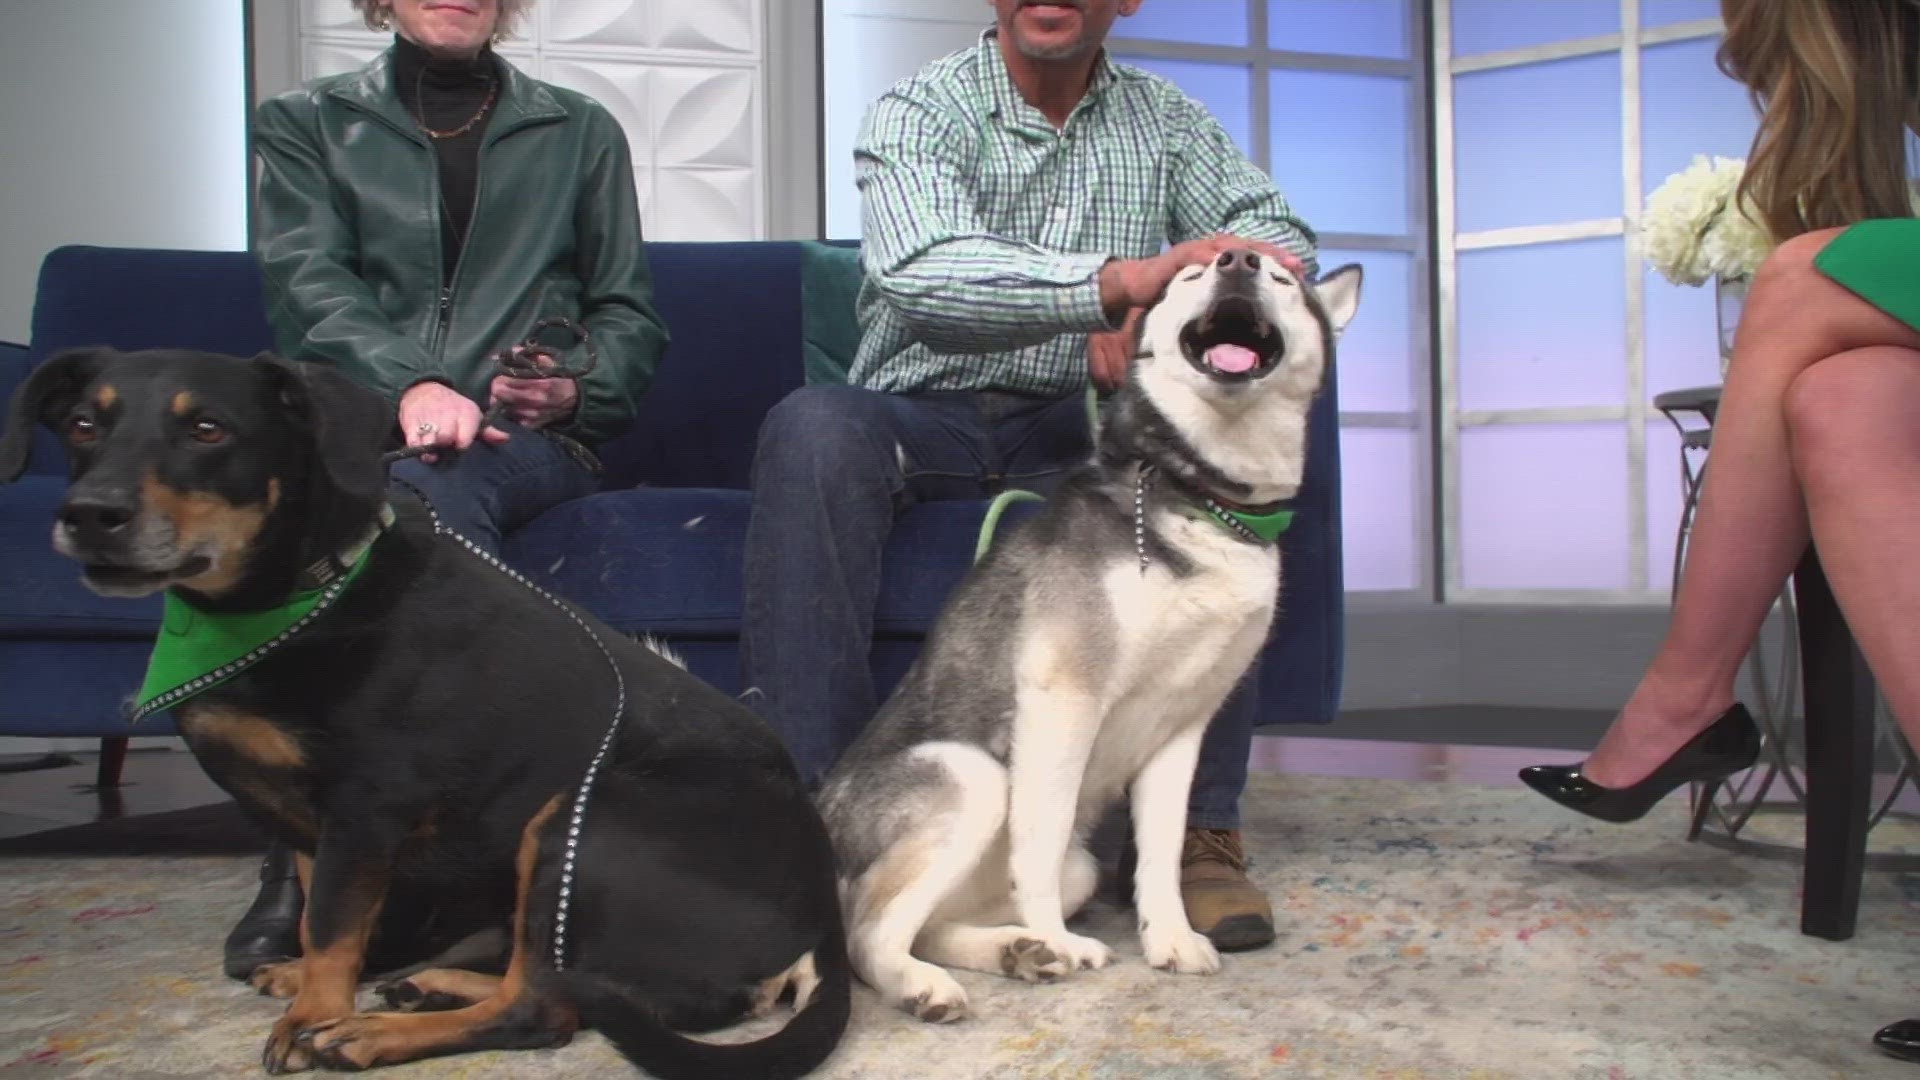 Meet Duke and Octane! They are up for adoption at MaxFund Animal Adoption Center, go to maxfund.org to learn more.